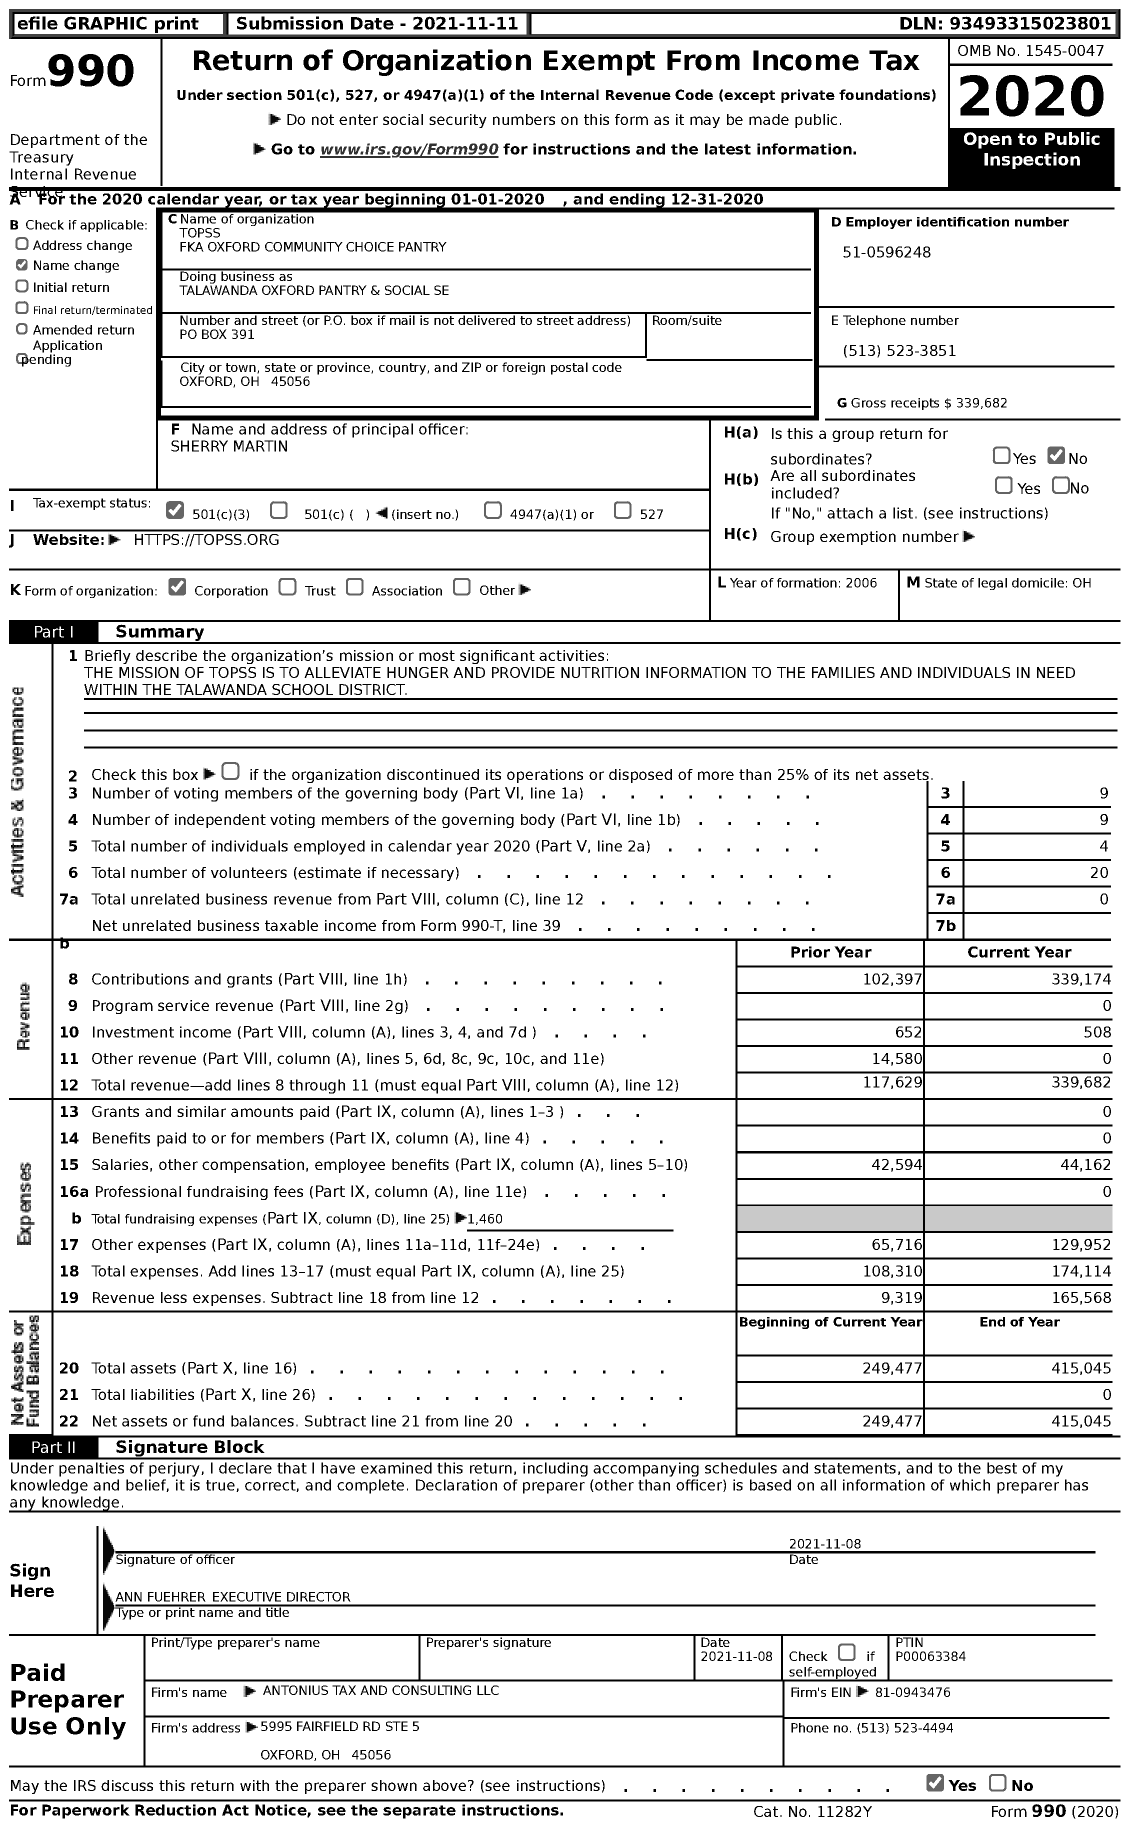 Image of first page of 2020 Form 990 for Talawanda Oxford Pantry and Social Se (TOPSS)